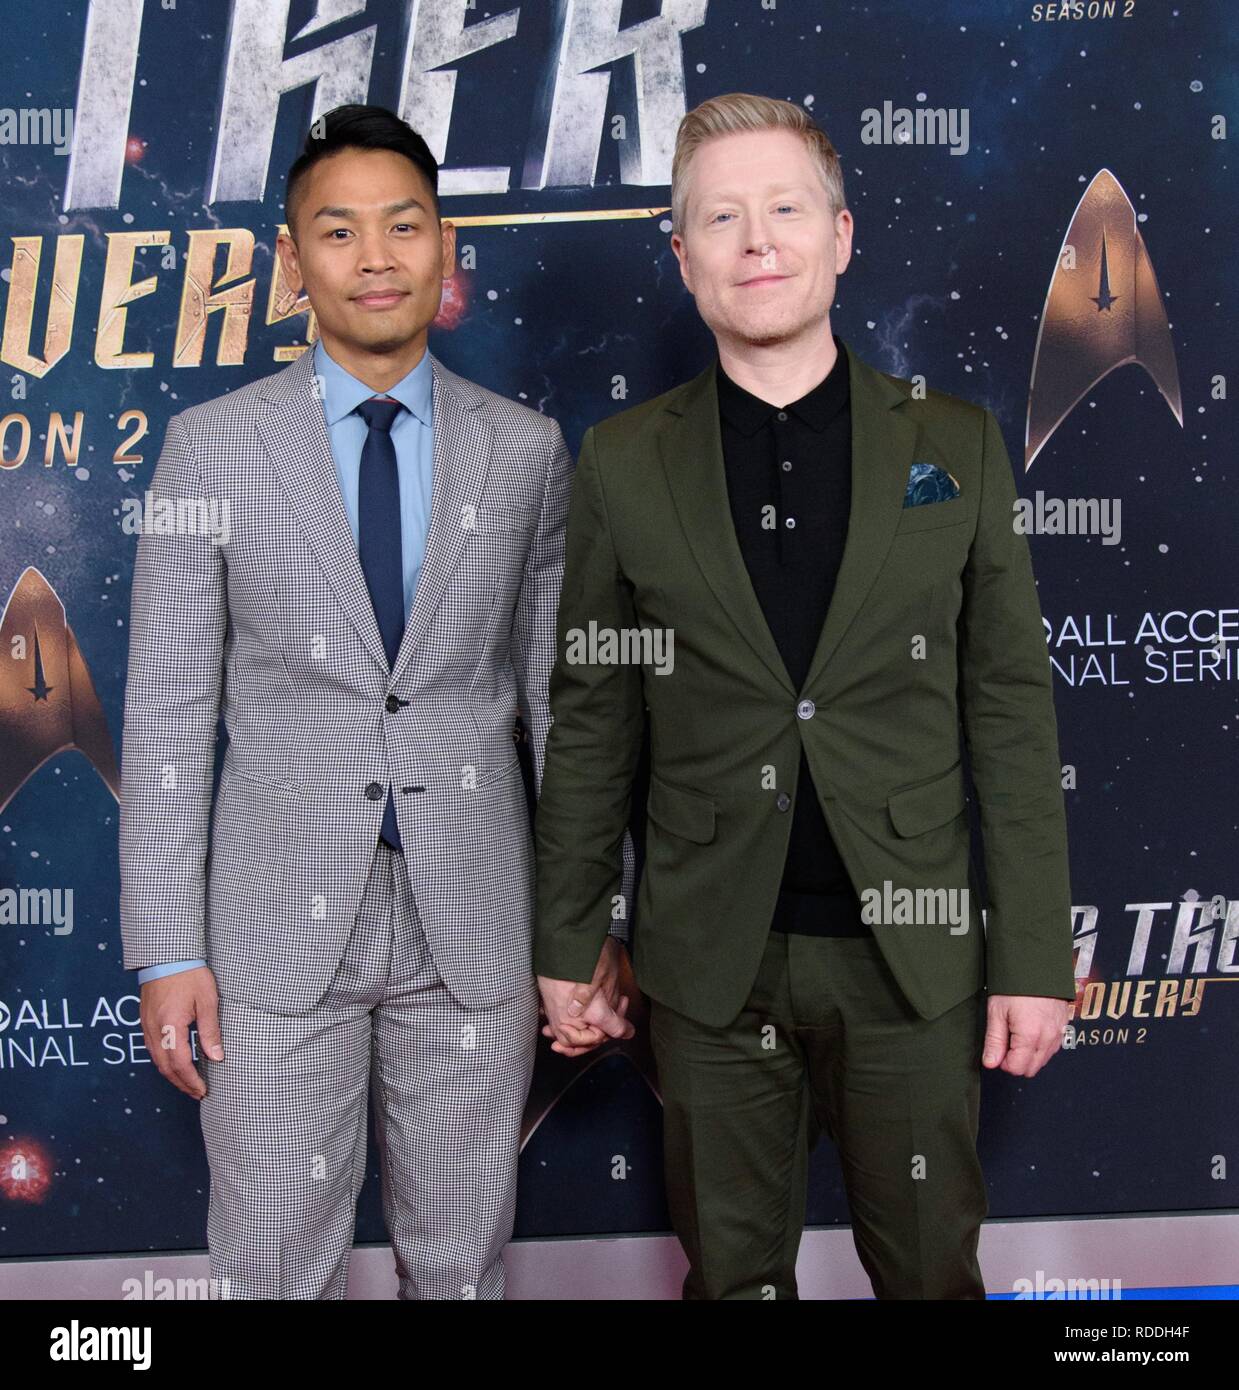 New York, NY, USA. 17th Jan, 2019. Anthony Rapp, Guest at arrivals for STAR TREK: DISCOVERY Official Season 2 Premiere Screening, Conrad New York, New York, NY January 17, 2019. Credit: RCF/Everett Collection/Alamy Live News Stock Photo